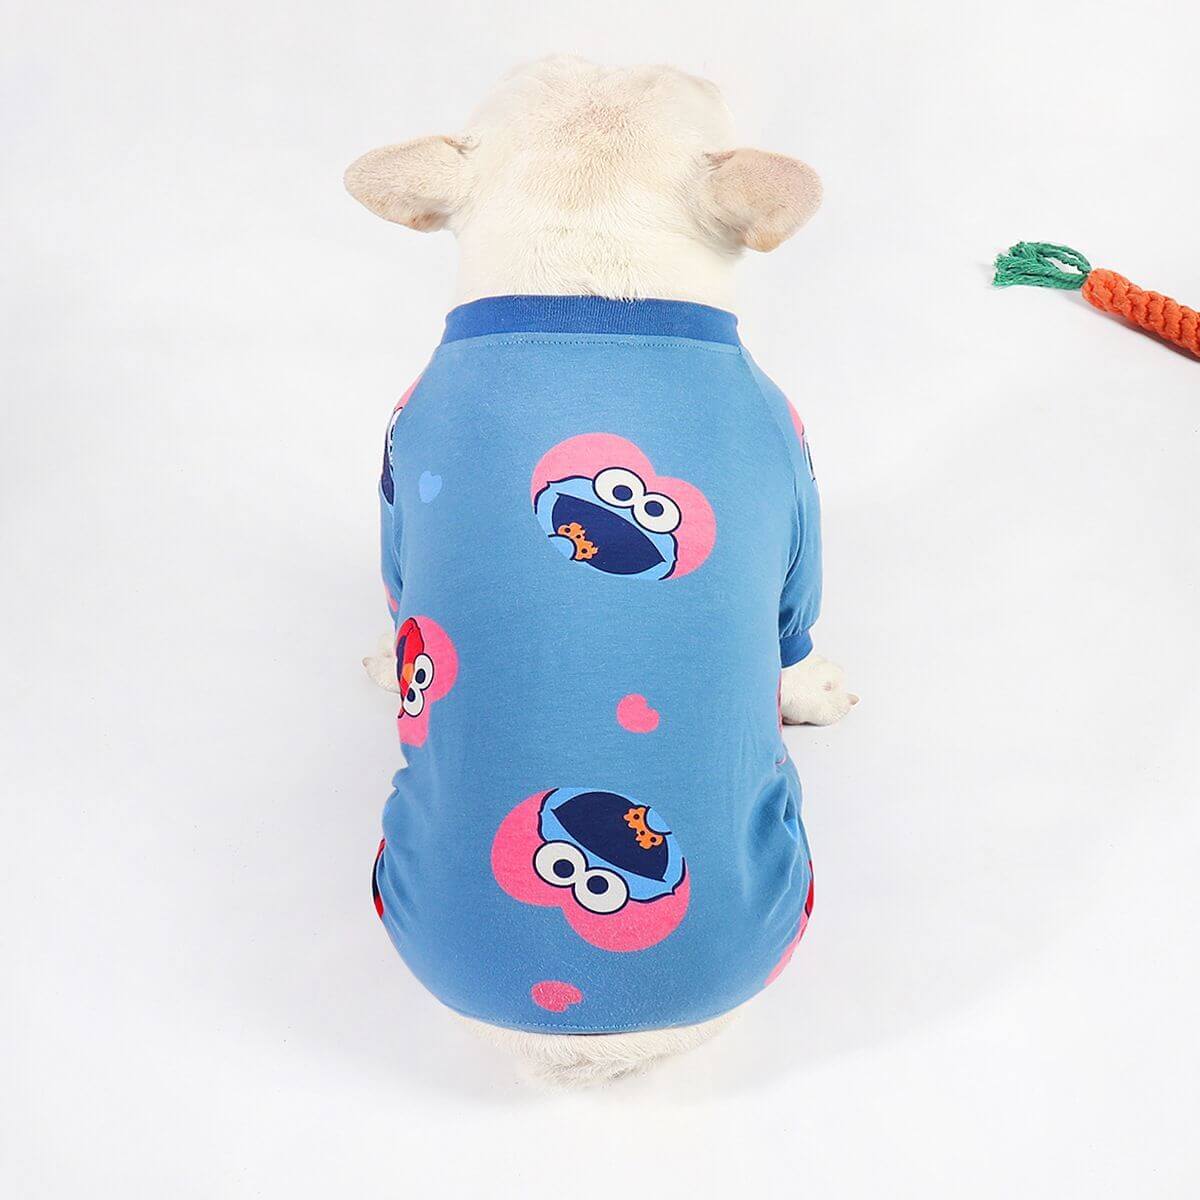 Dog Cartoon Blue Jammies Pajamas for Bulldogs BY FRENCHIELY